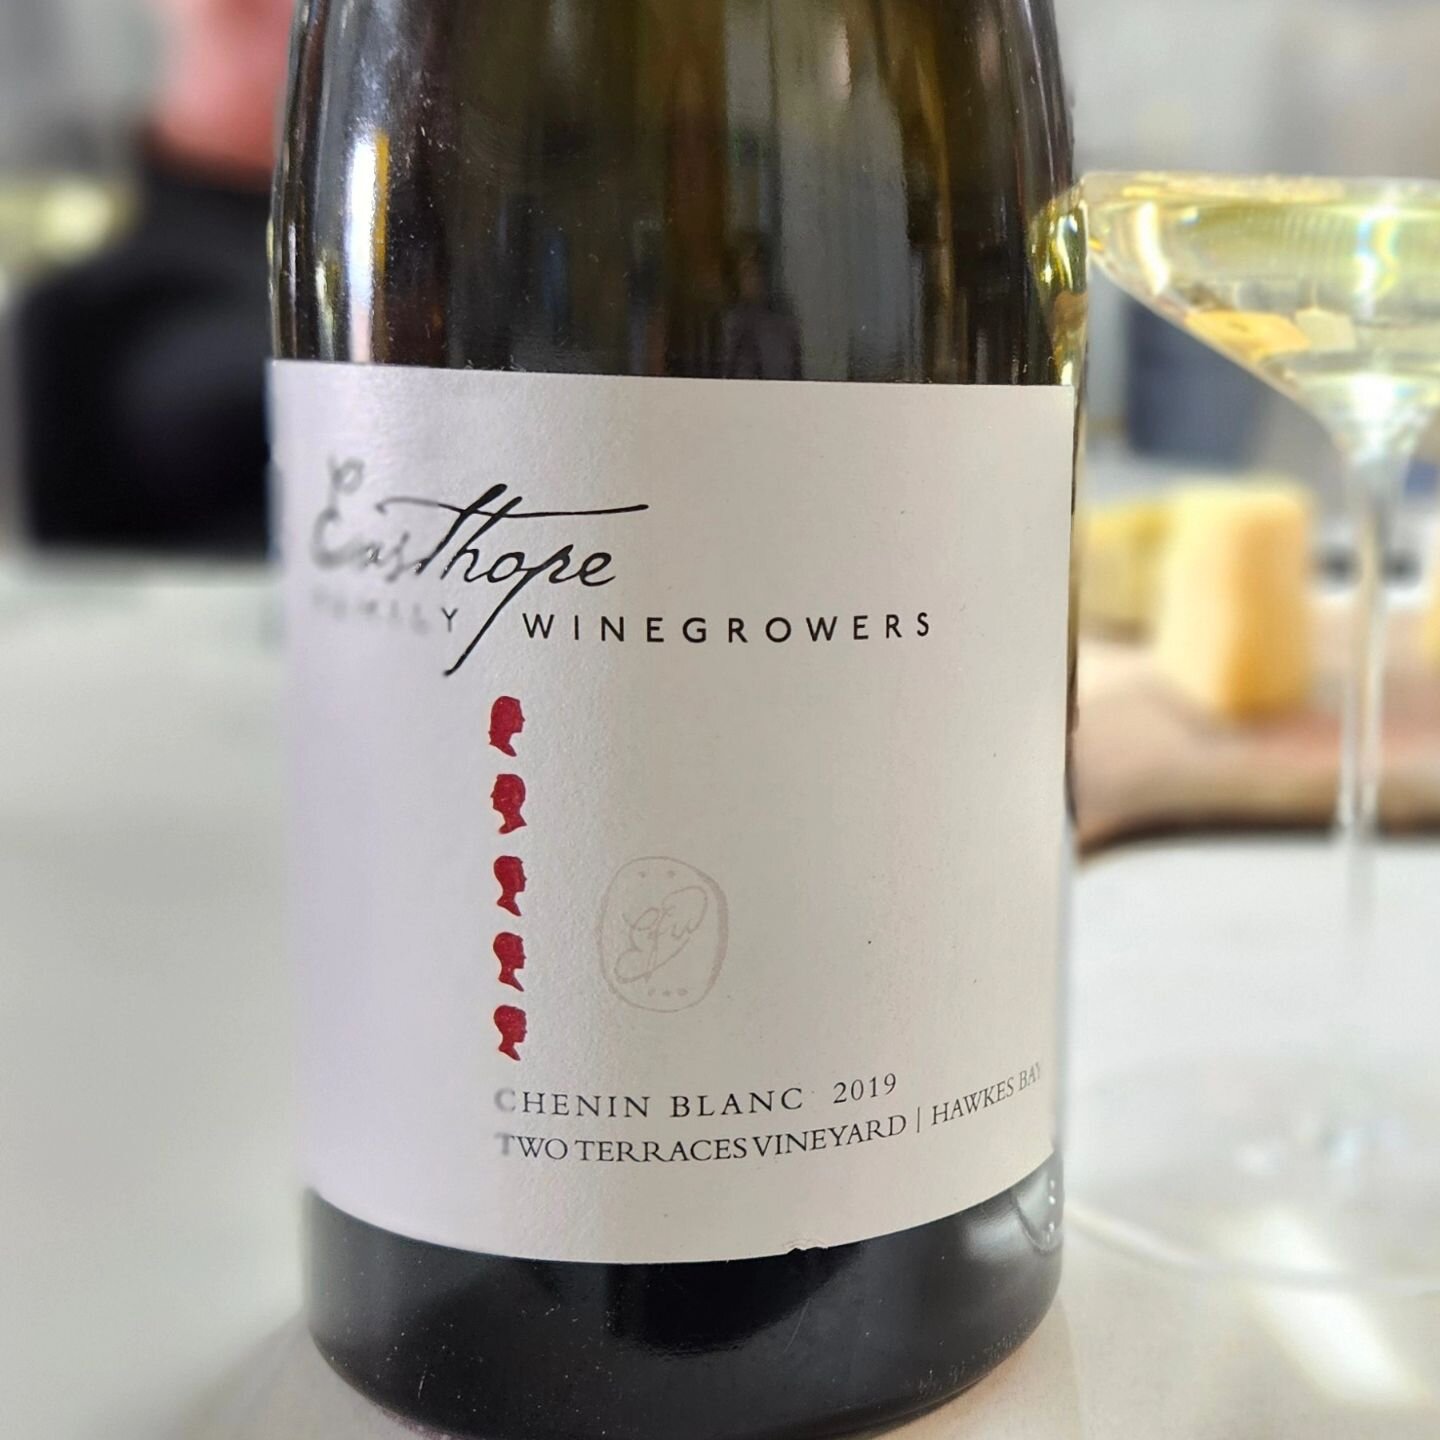 Yesterday we shared this bottle with Ian and Linda from @twoterracesvineyard. 
A 2019 'Two Terraces Vineyard' Chenin Blanc from the back of our cellar.  Gorgeous. 
Celebrating Chenin Blanc and our 7th vintage with Two Terraces 

#nzv2017 #cheninblanc